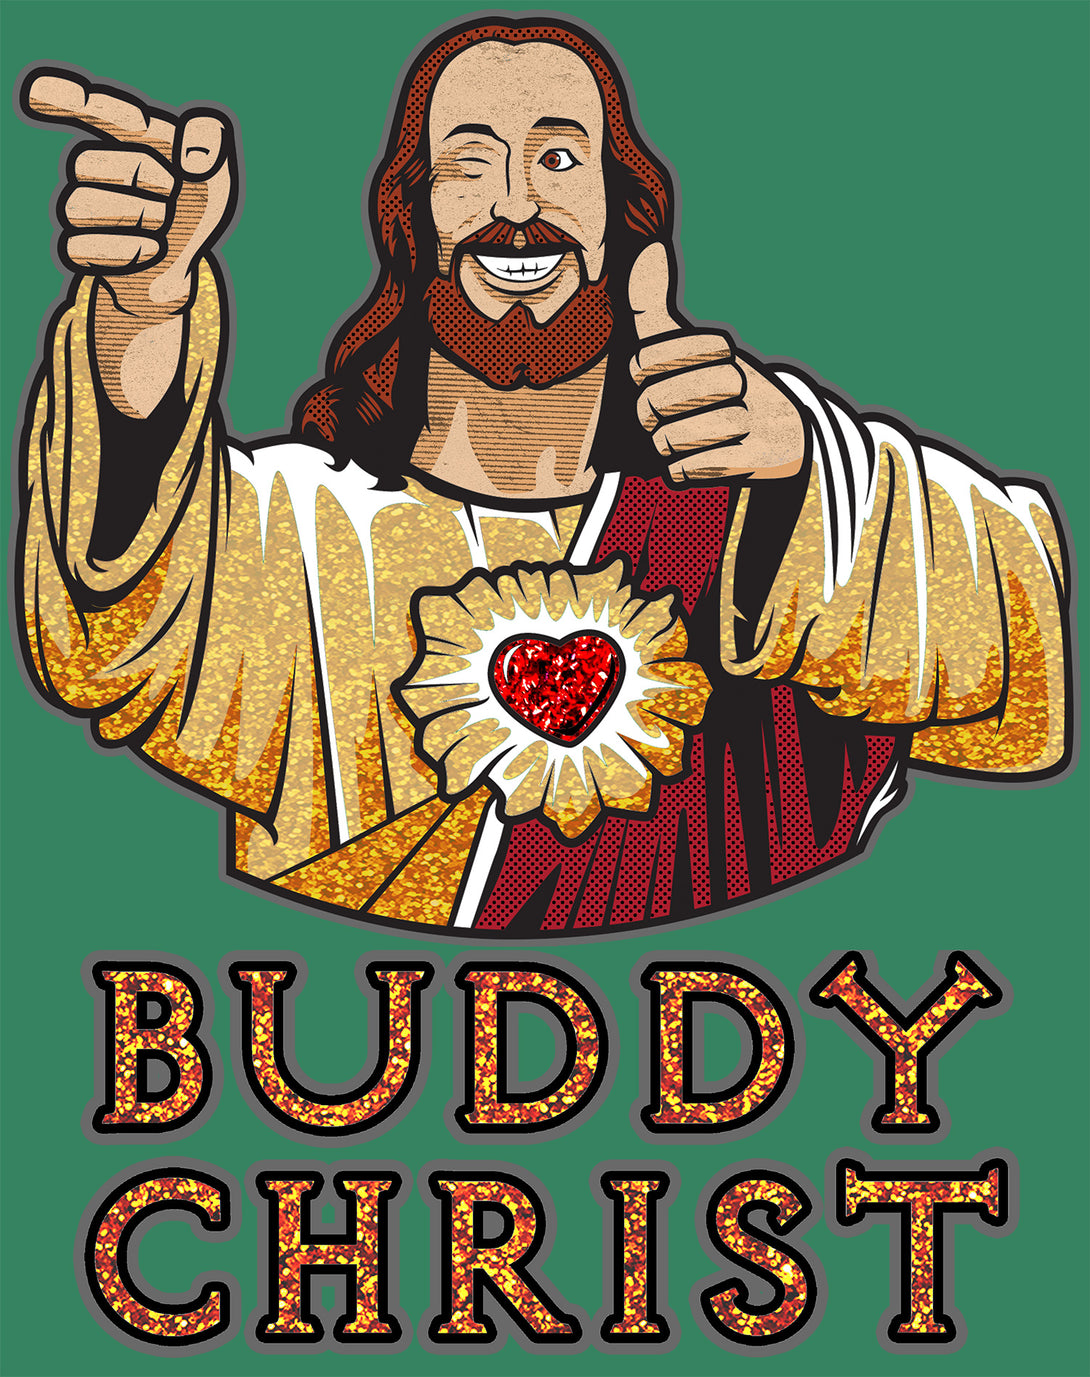 Kevin Smith View Askewniverse Buddy Christ Got Golden Wow Edition Official Men's T-Shirt Green - Urban Species Design Close Up